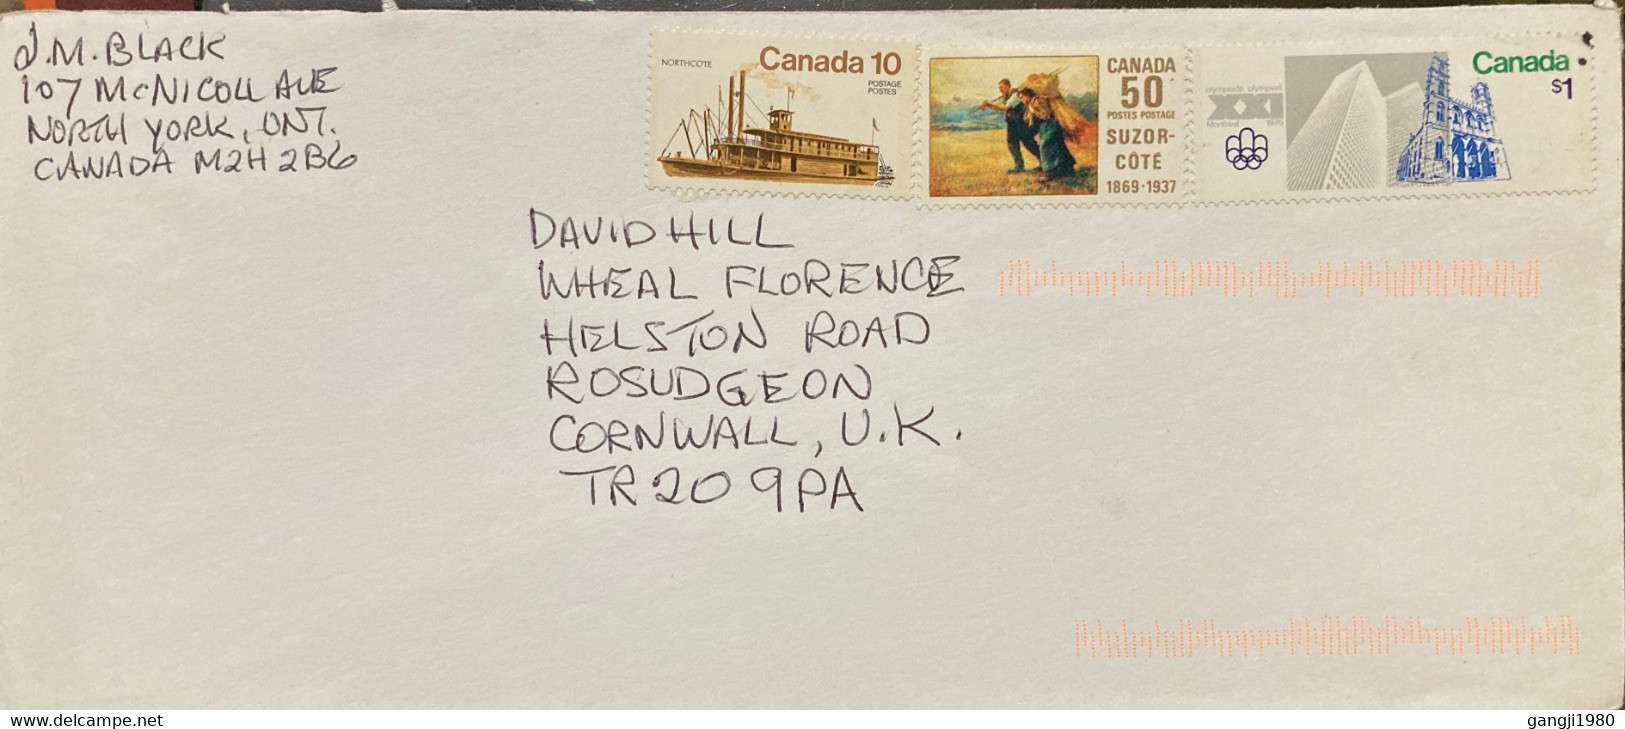 CANADA 2000, SHIP,COUPLE,OLYMPIC,BUILDING,ARCHITECTURE,ART,PAINTING USED COVER TO ENGLAND - Covers & Documents